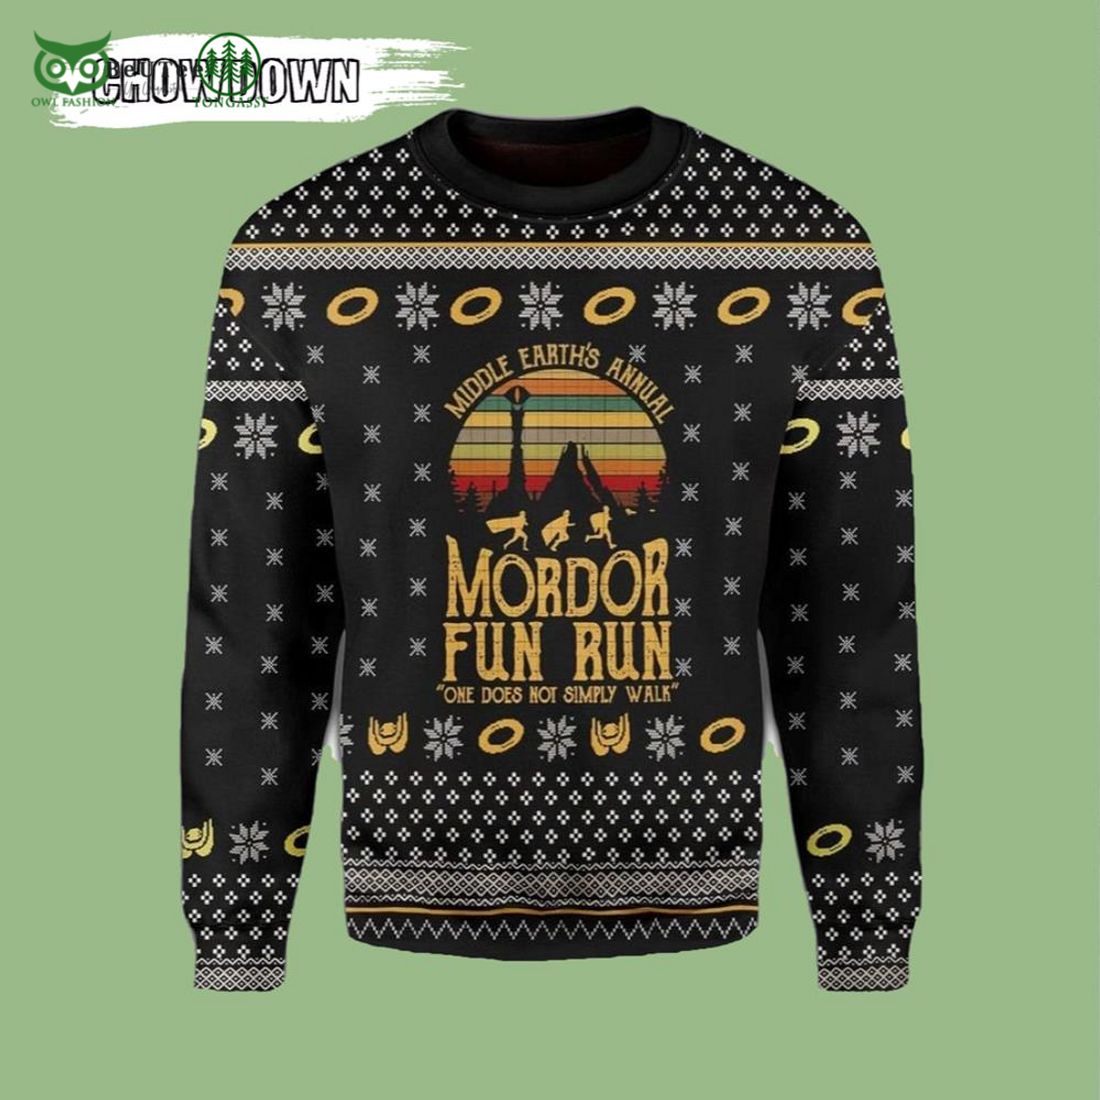 middle earths annual fun run mordor lord of the rings ugly christmas sweater 1 m2vOe